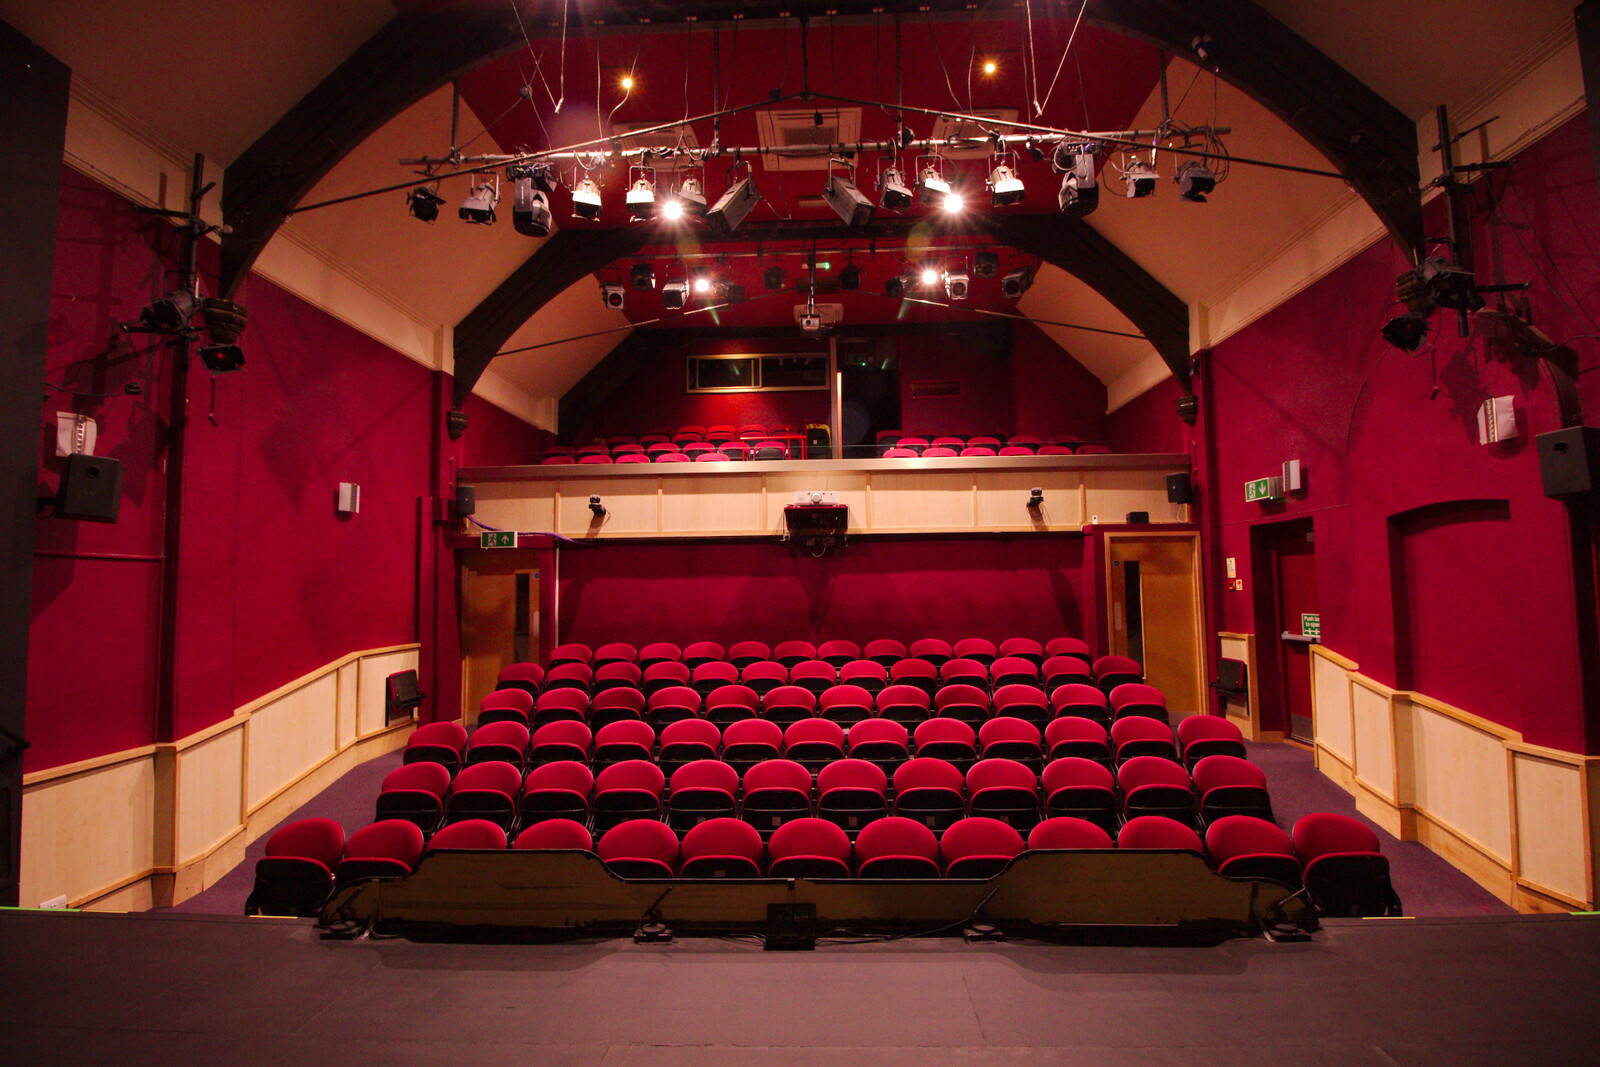 A view of the theatre from the stage